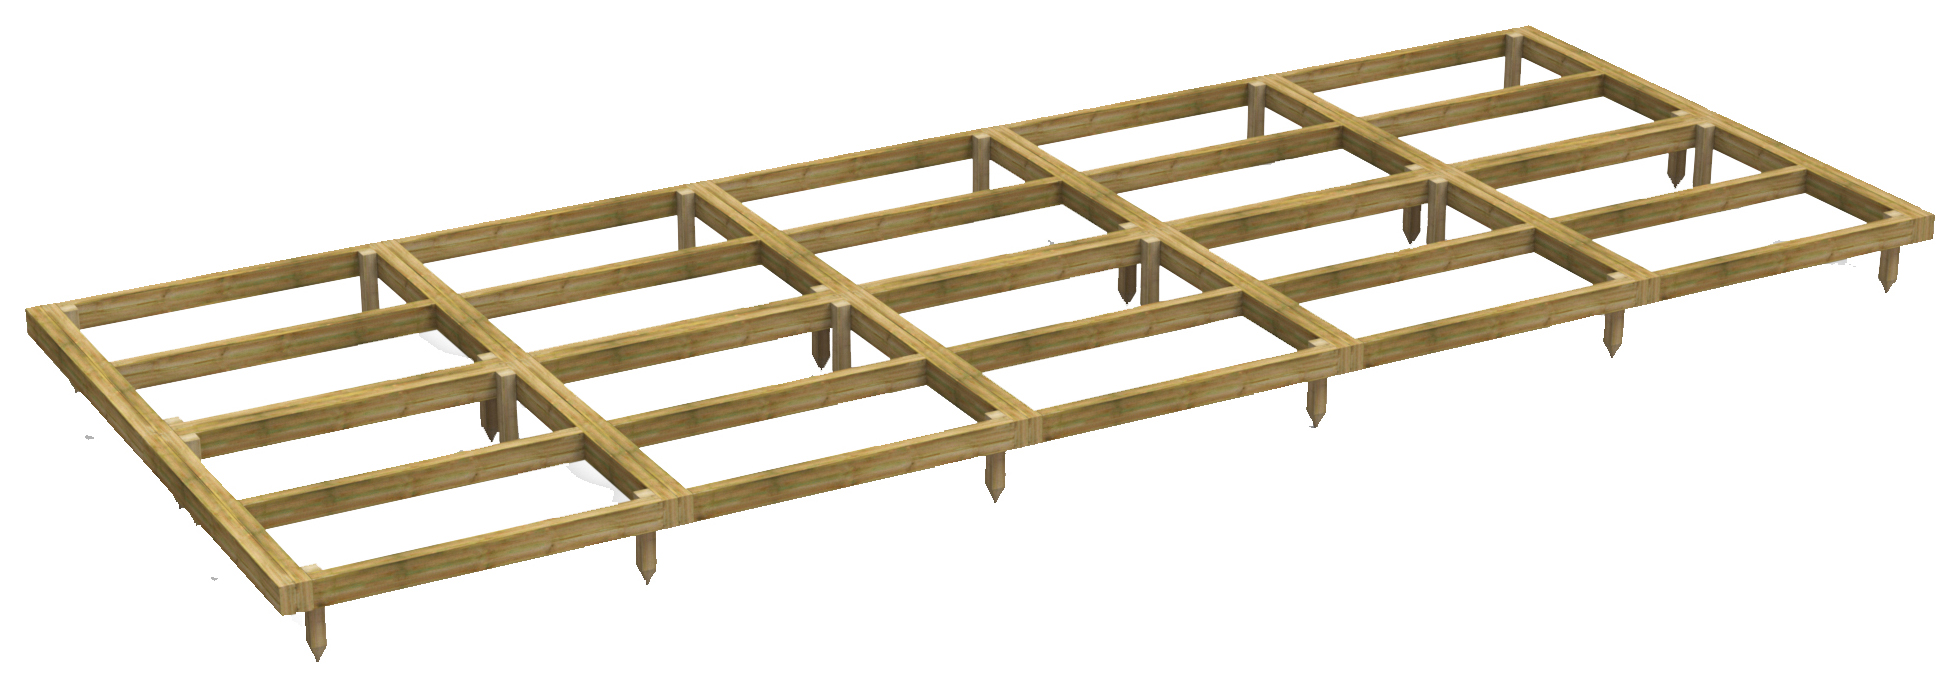 Power Sheds 20 x 8ft Pressure Treated Garden Building Base Kit